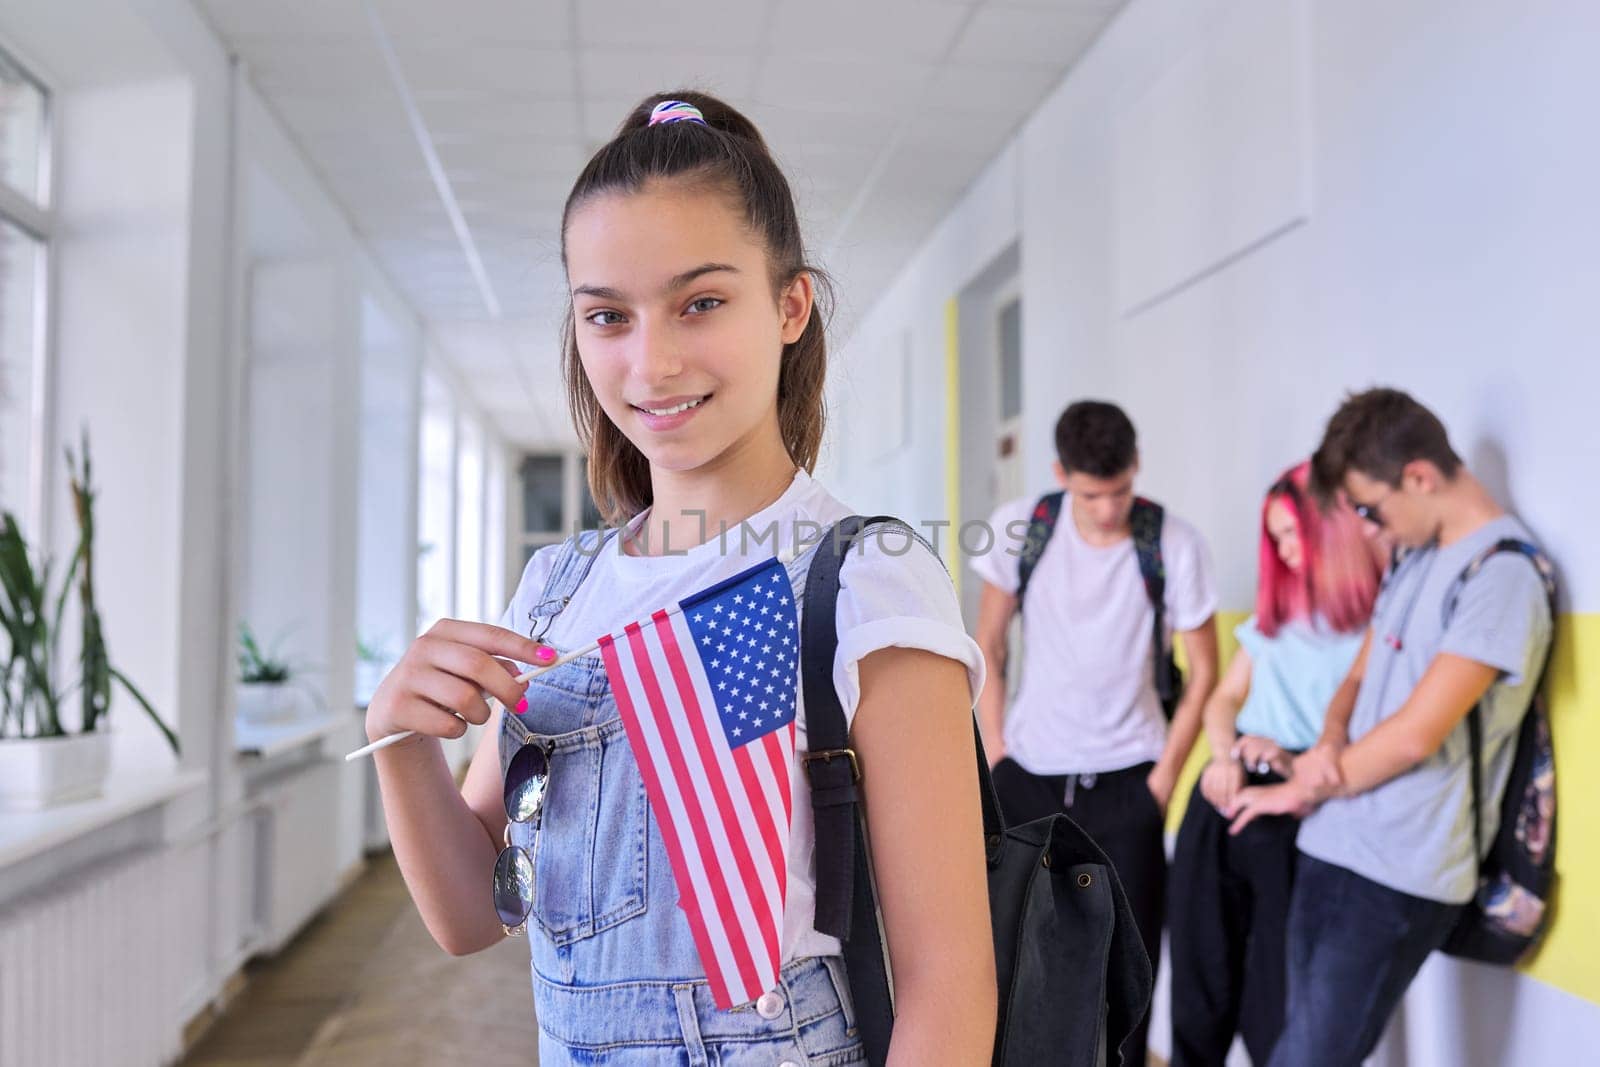 Student teenager girl with USA flag inside school, school children group background. United States of America, education and youth, patriotism people concept